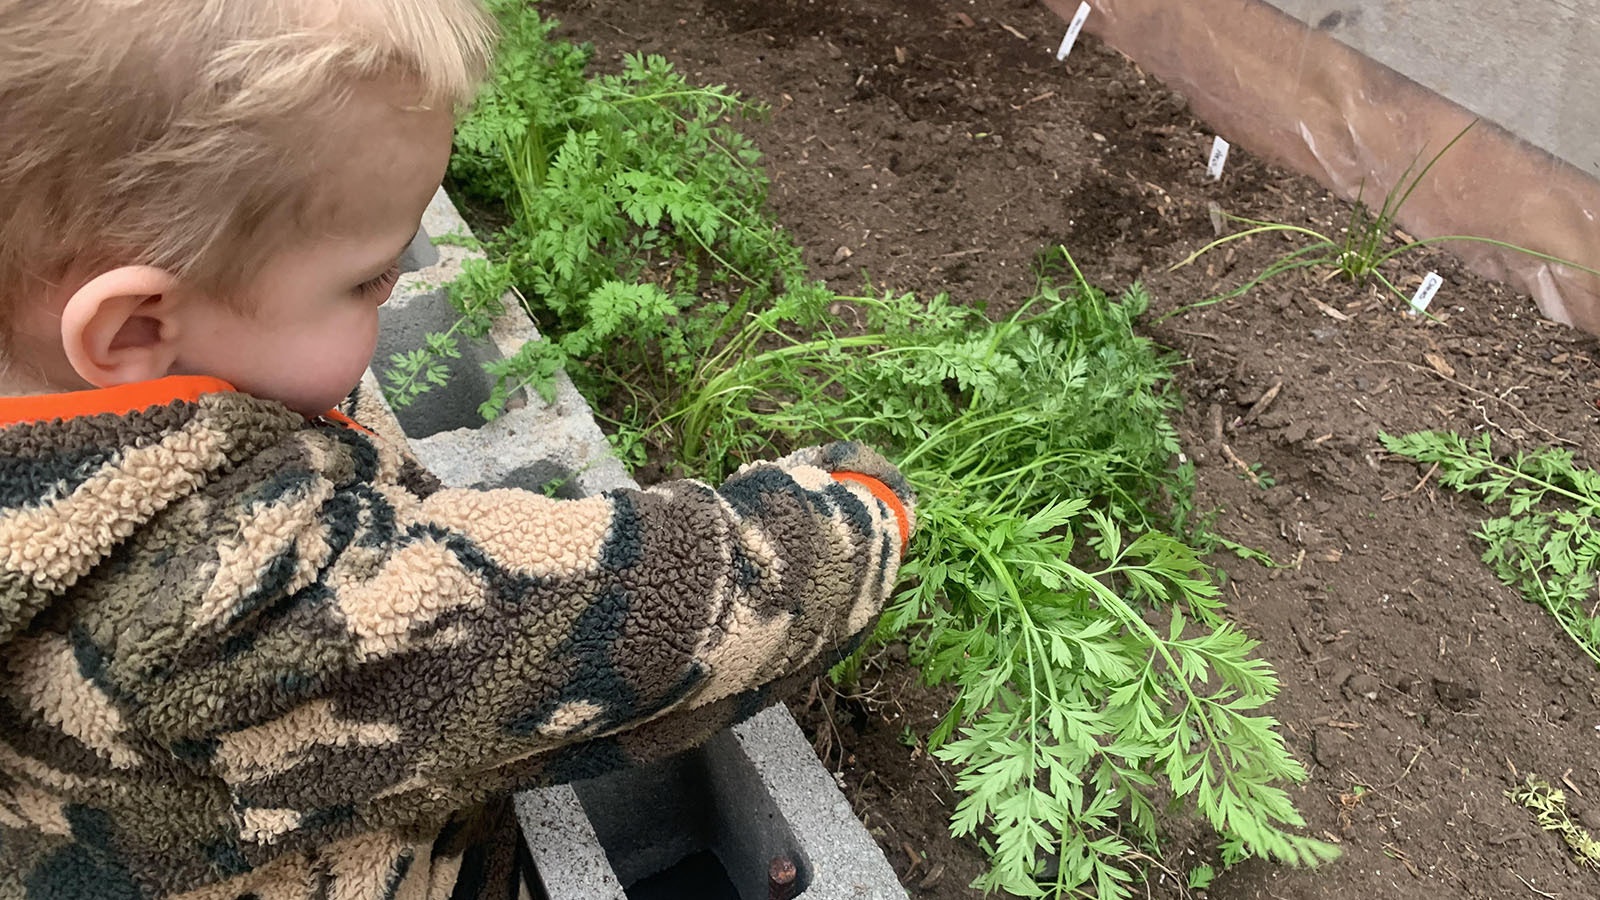 Sara Ross' 2-year-old grandson Huxton reaches for a carrot in a raised bed in his grandma's sunken greenhouse.